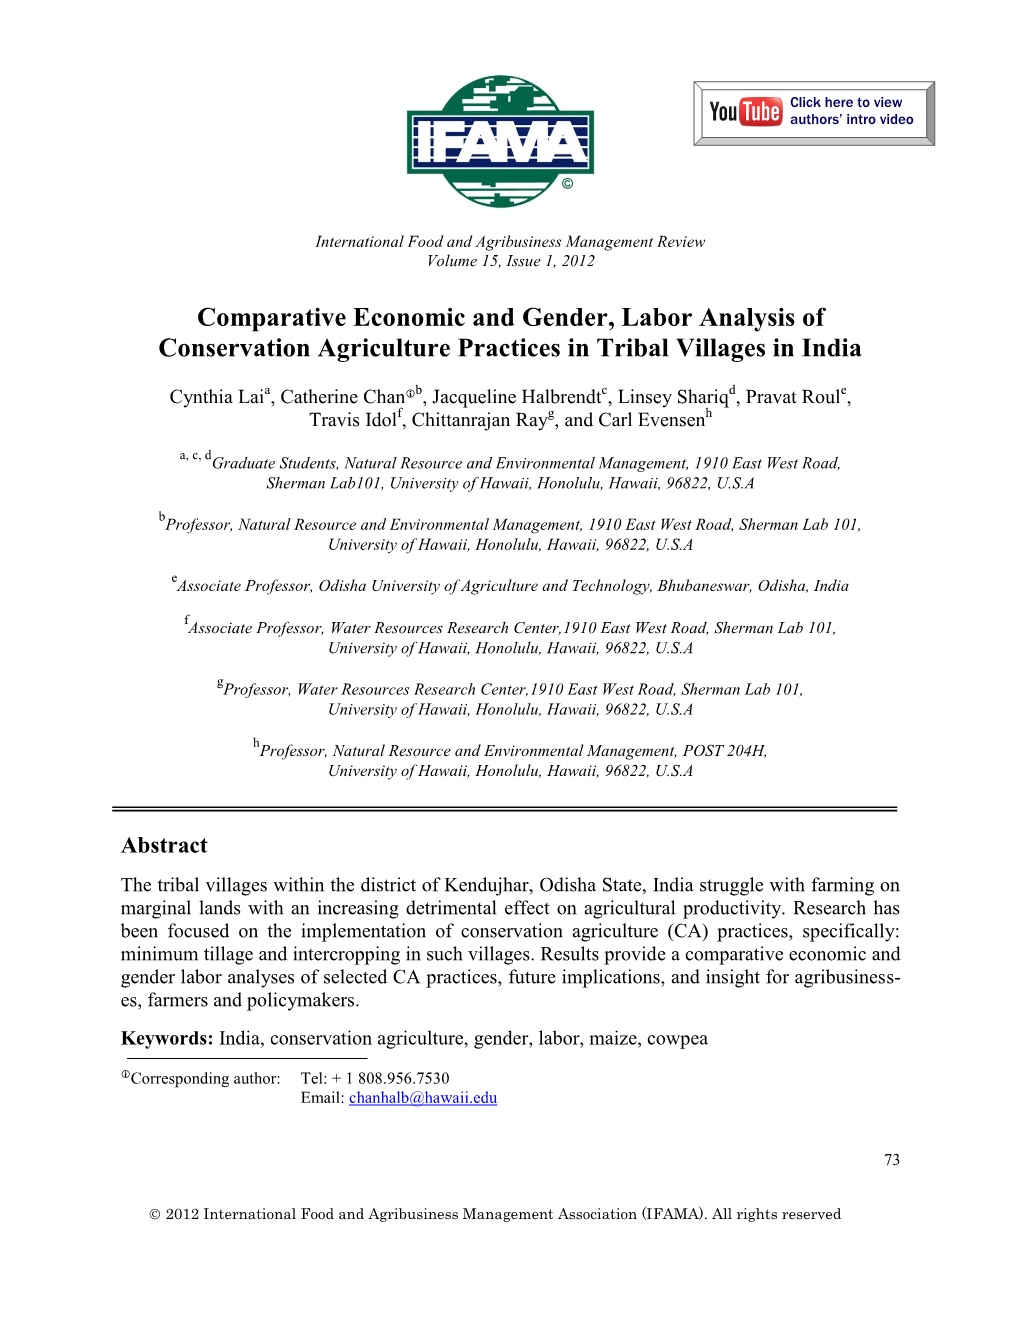 Comparative Economic and Gender, Labor Analysis of Conservation Agriculture Practices in Tribal Villages in India